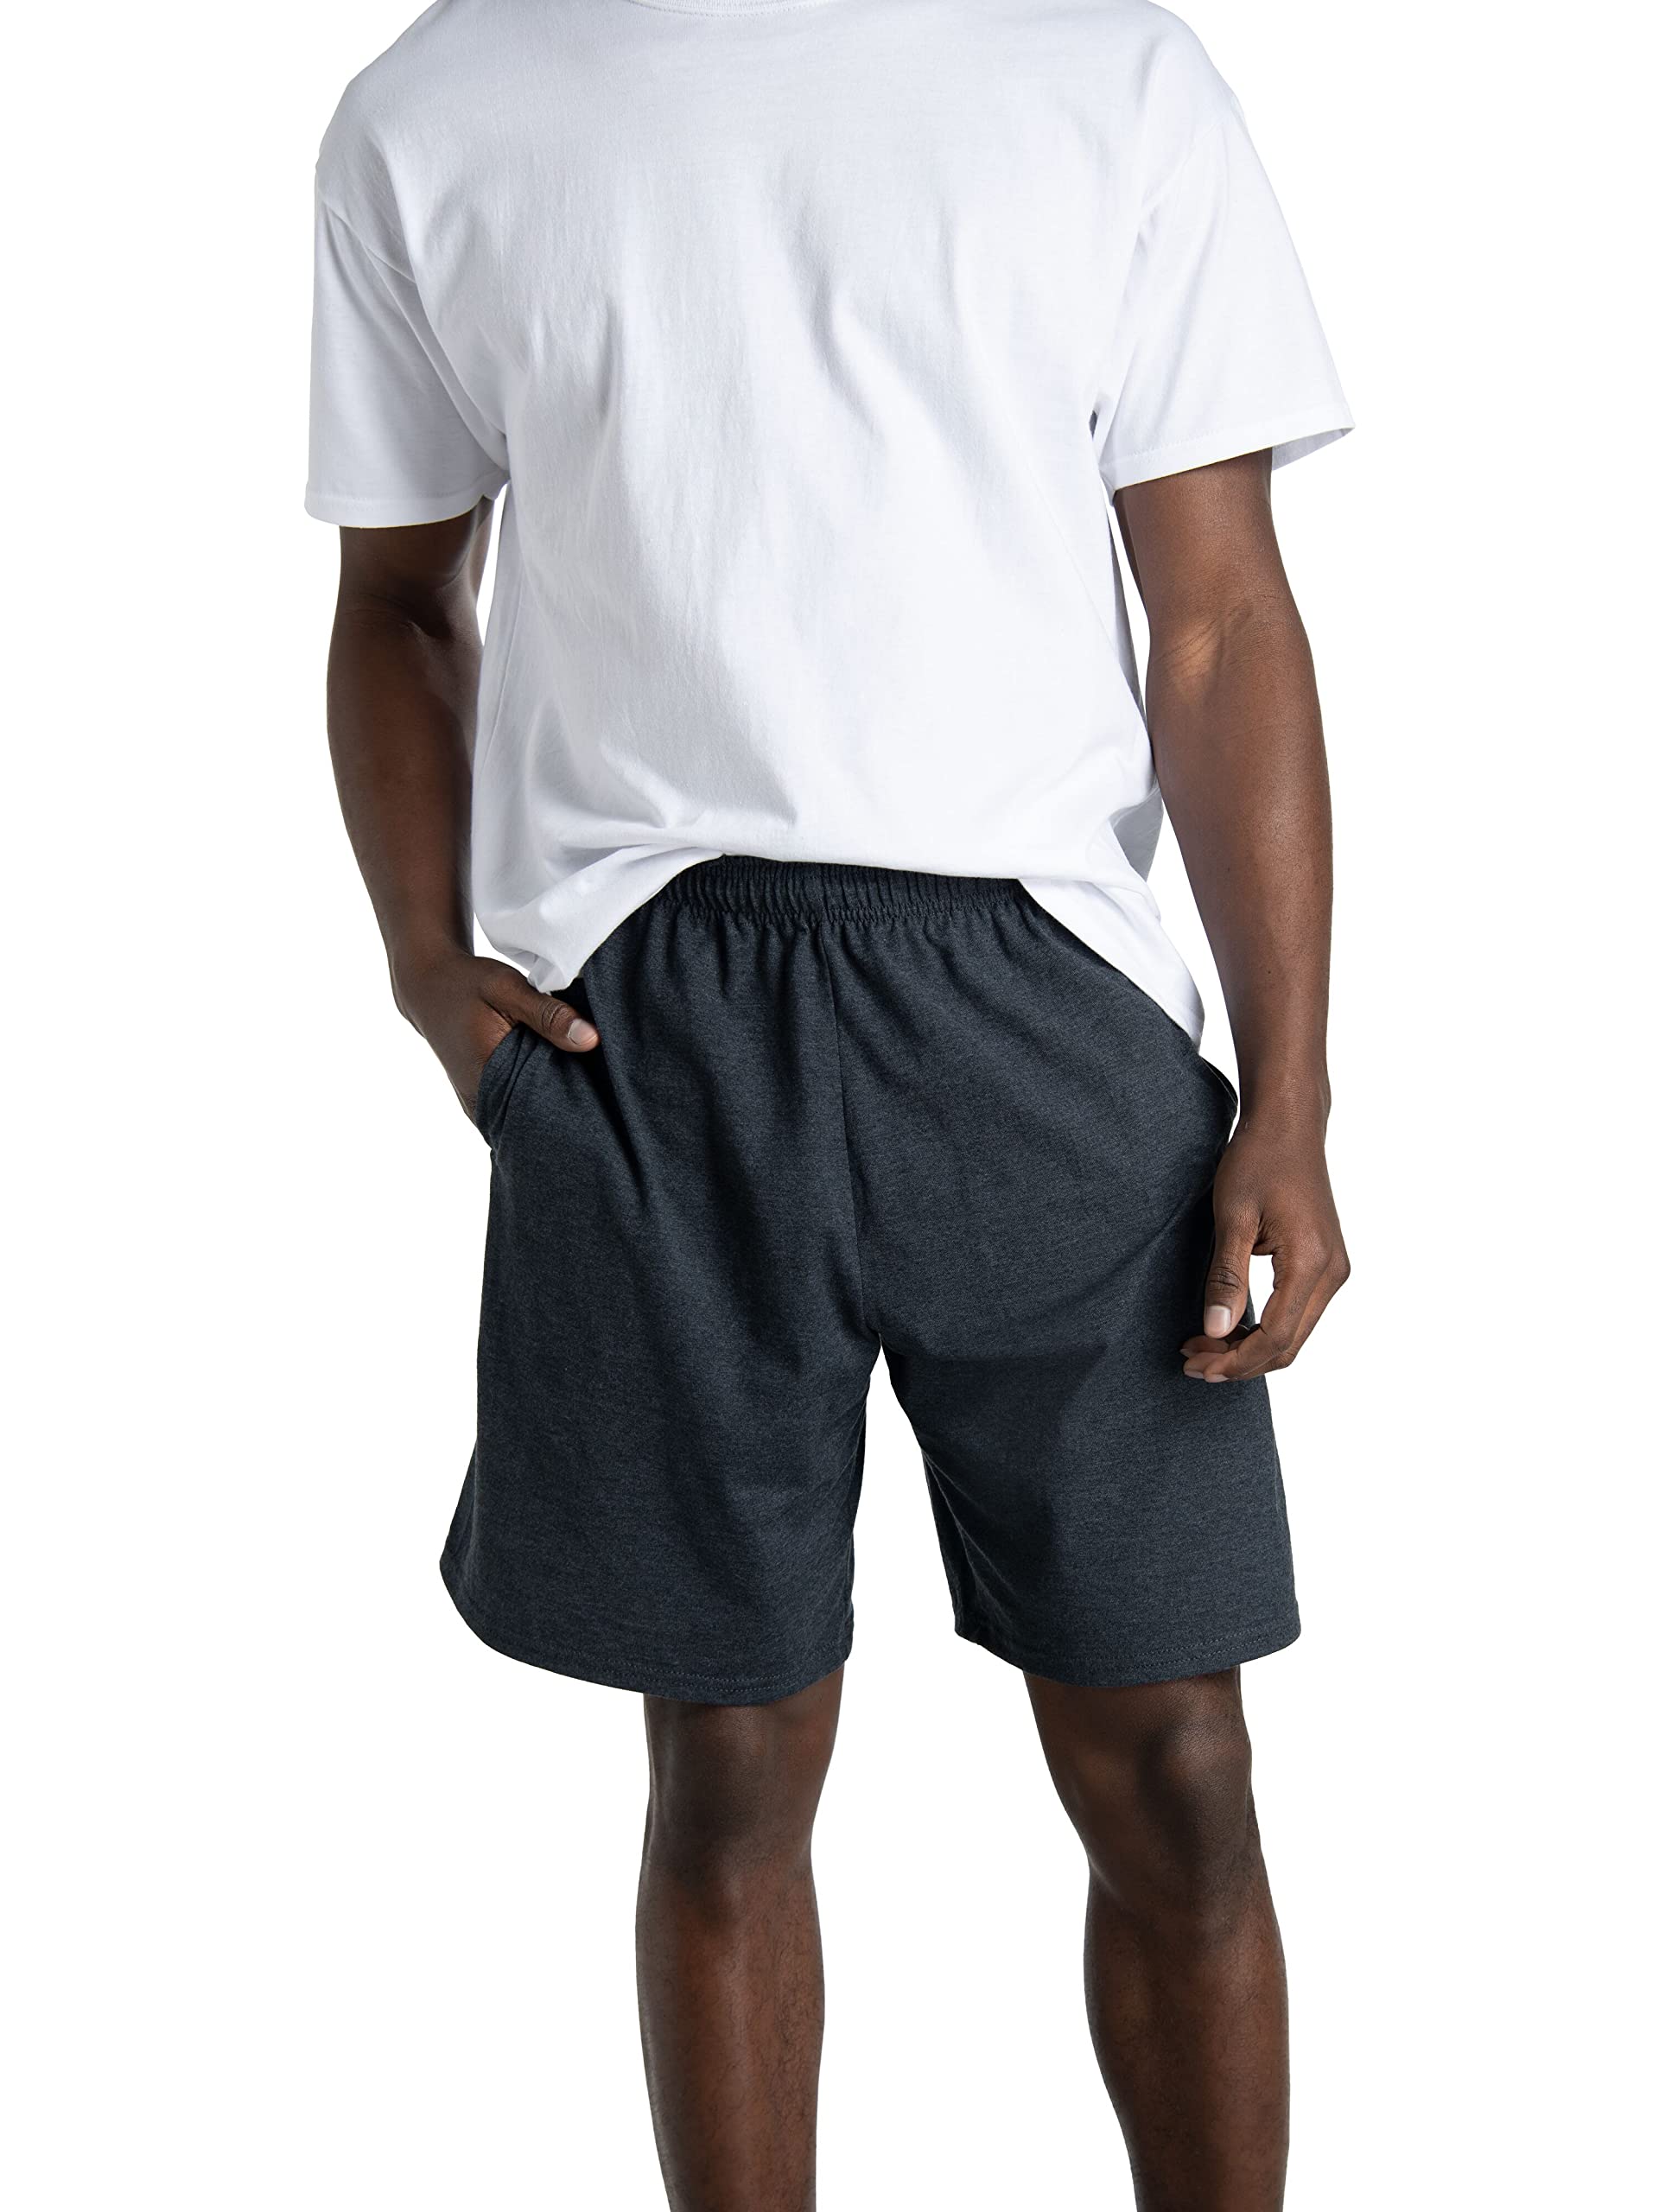 Fruit of the Loom Men's Eversoft Cotton Shorts with Pockets (S-4XL)